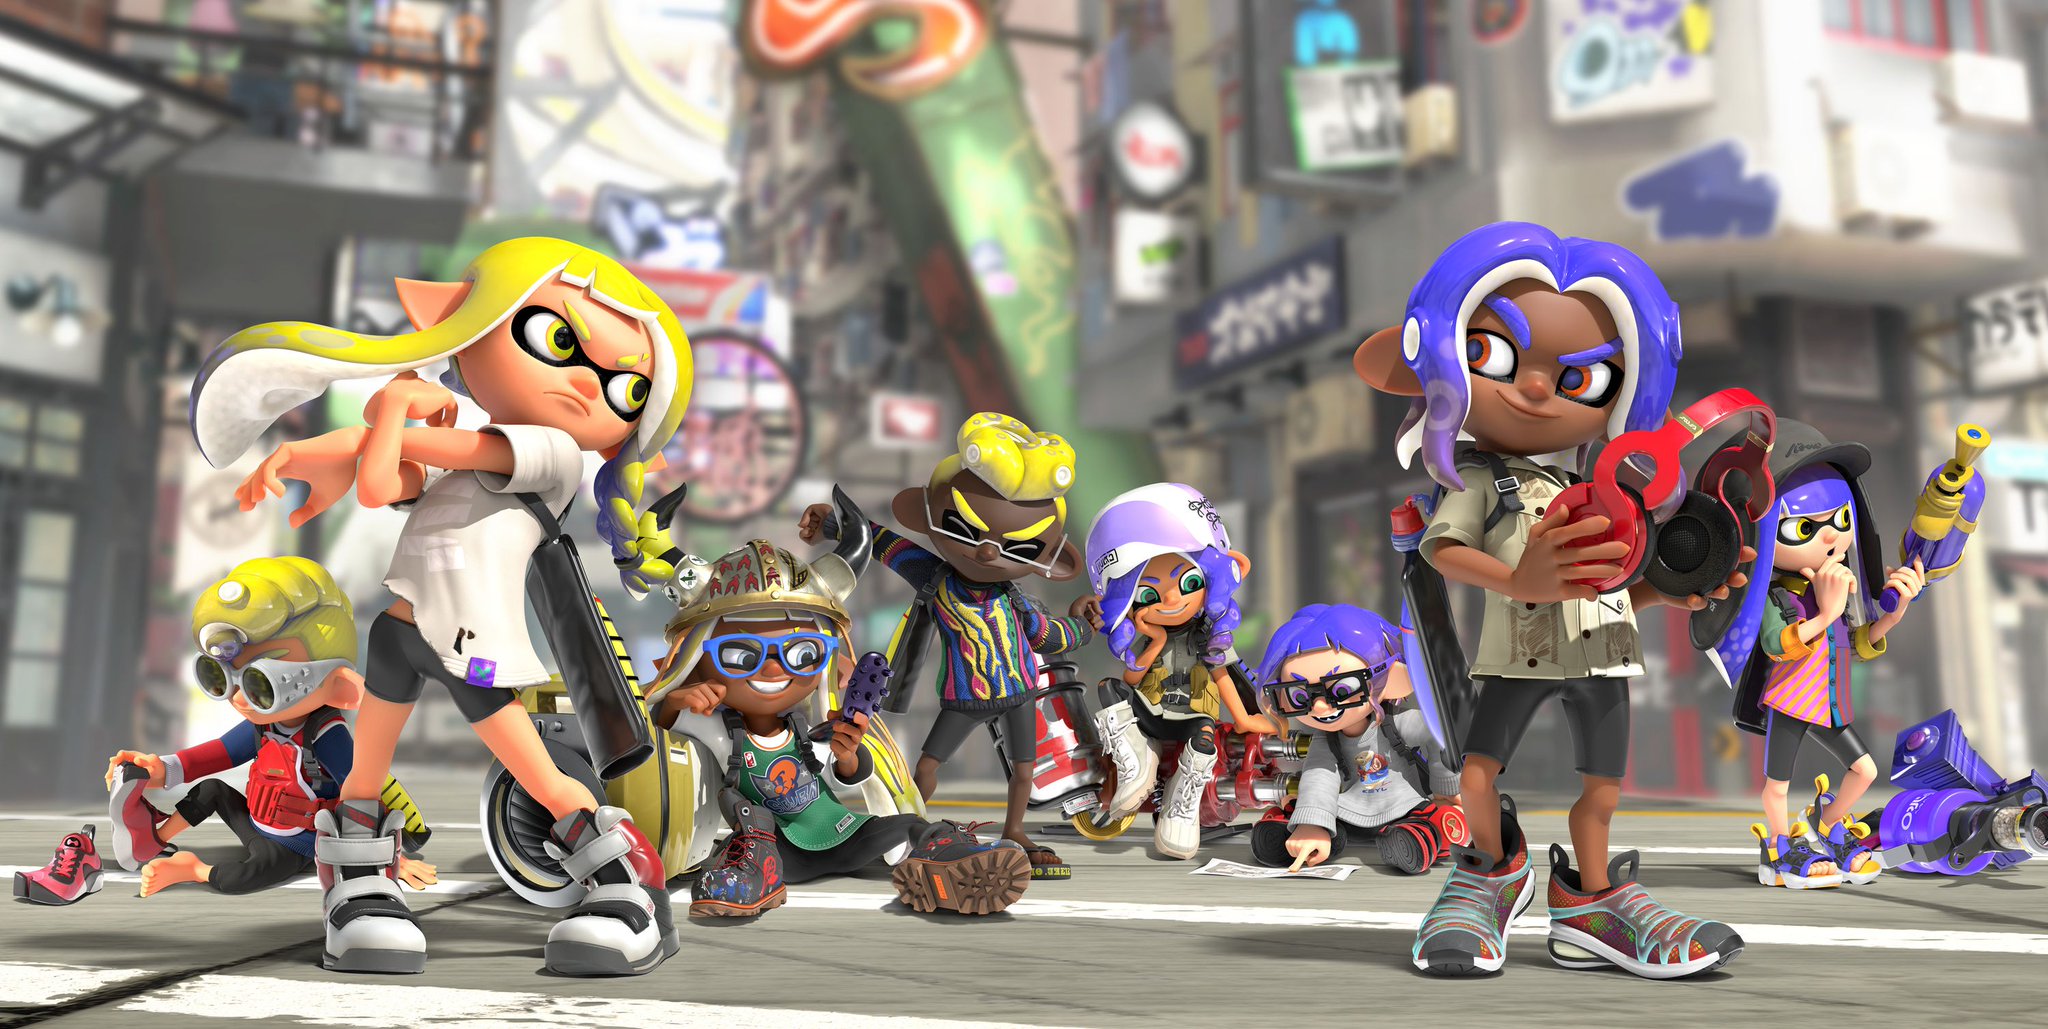 Polygon on X: Fans are obsessed with Google's Splatoon and